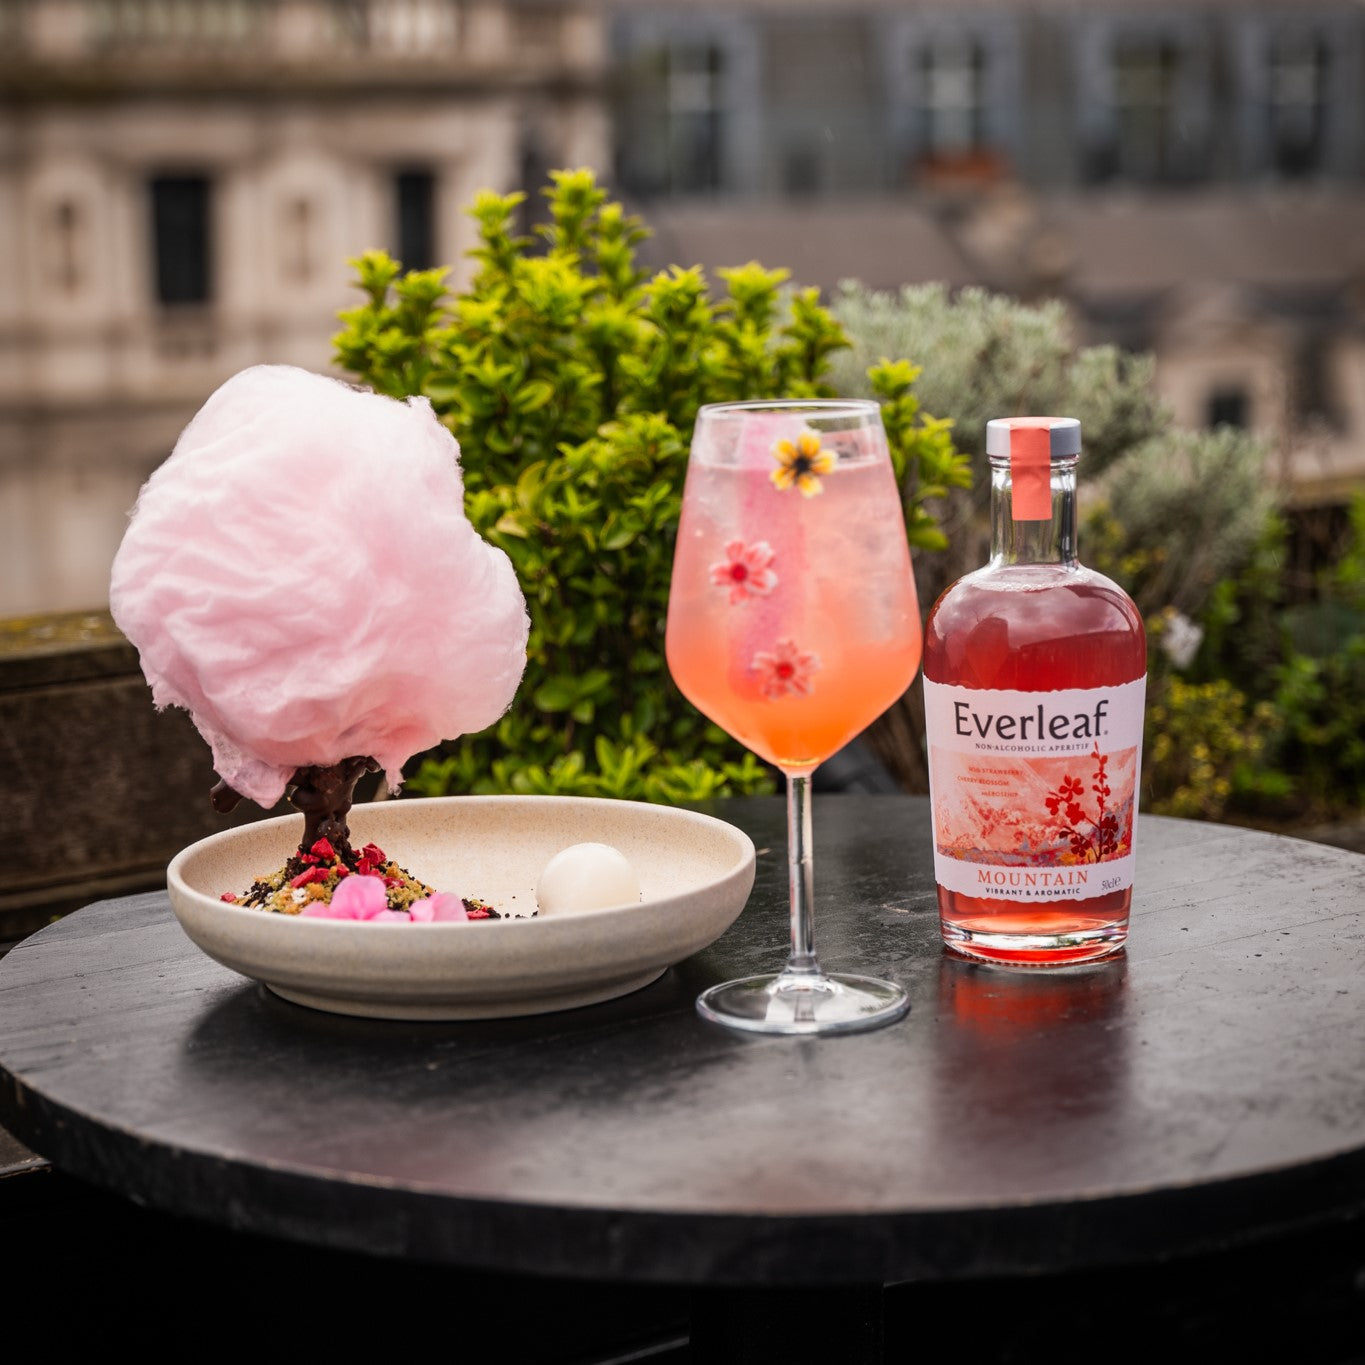 9 Venues to try Everleaf Cherry Blossom Cocktails in London made with Everleaf Mountain